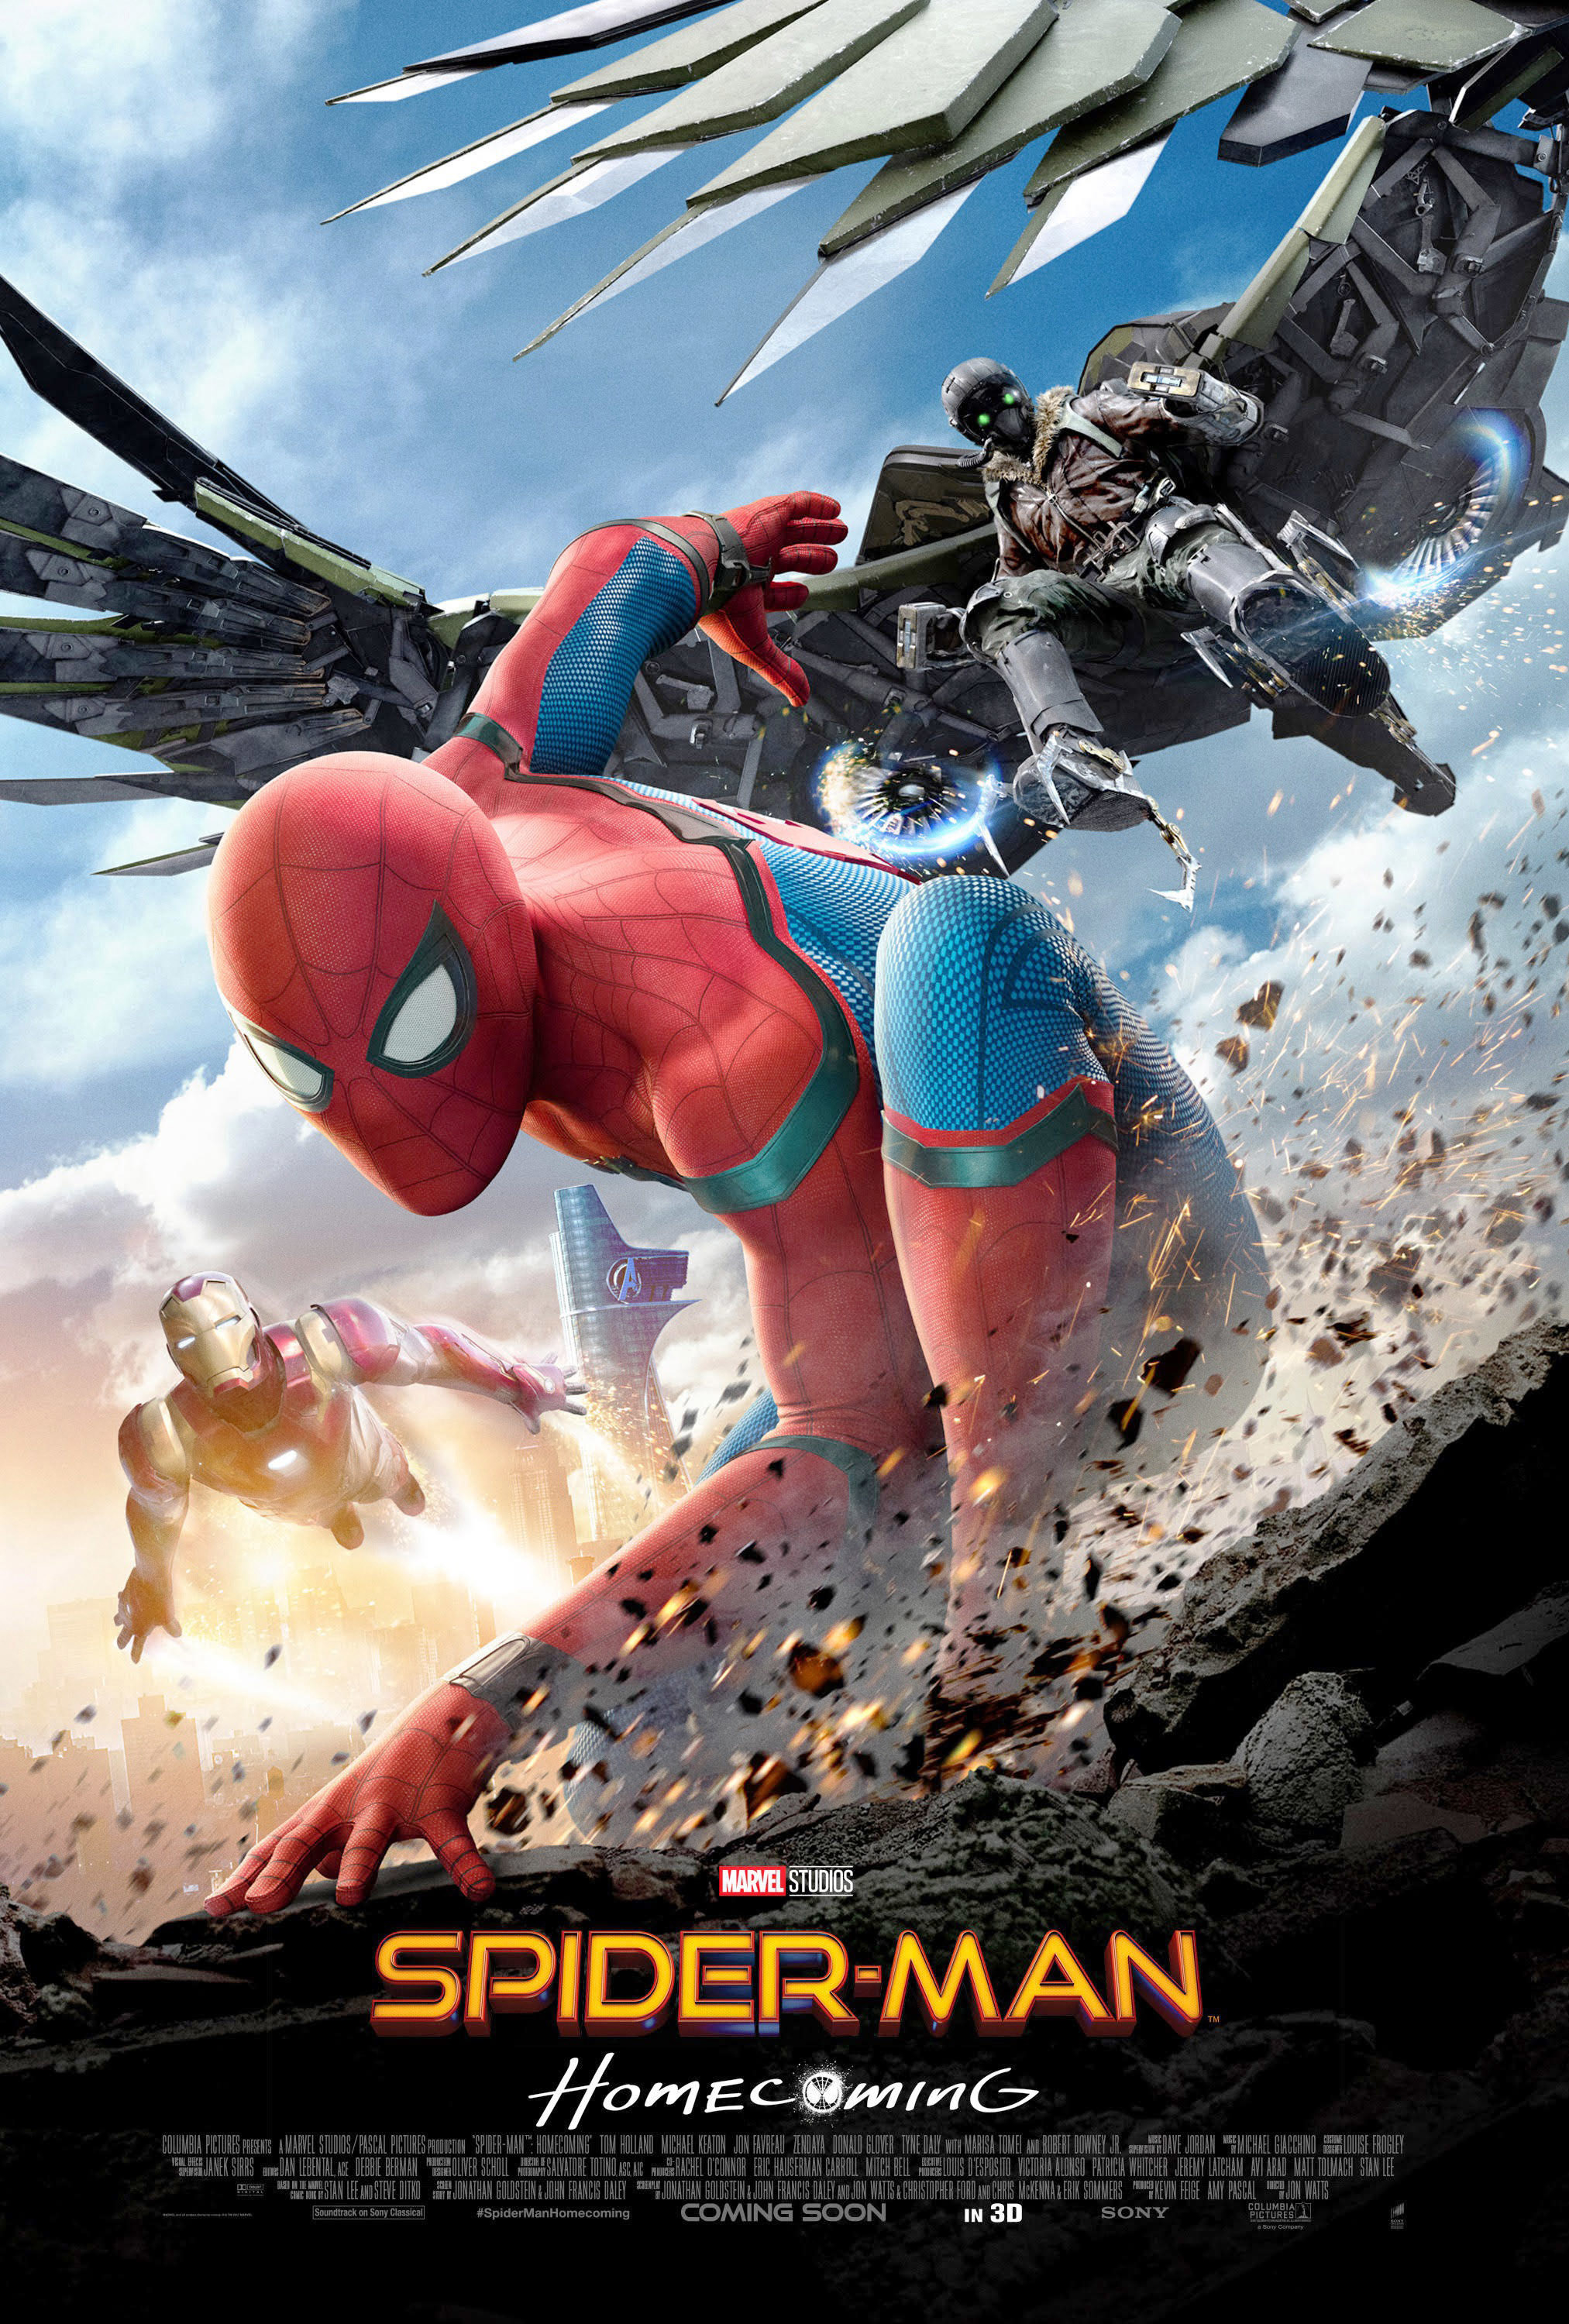 The poster, with Spider-Man, Iron Man, and the Vulture